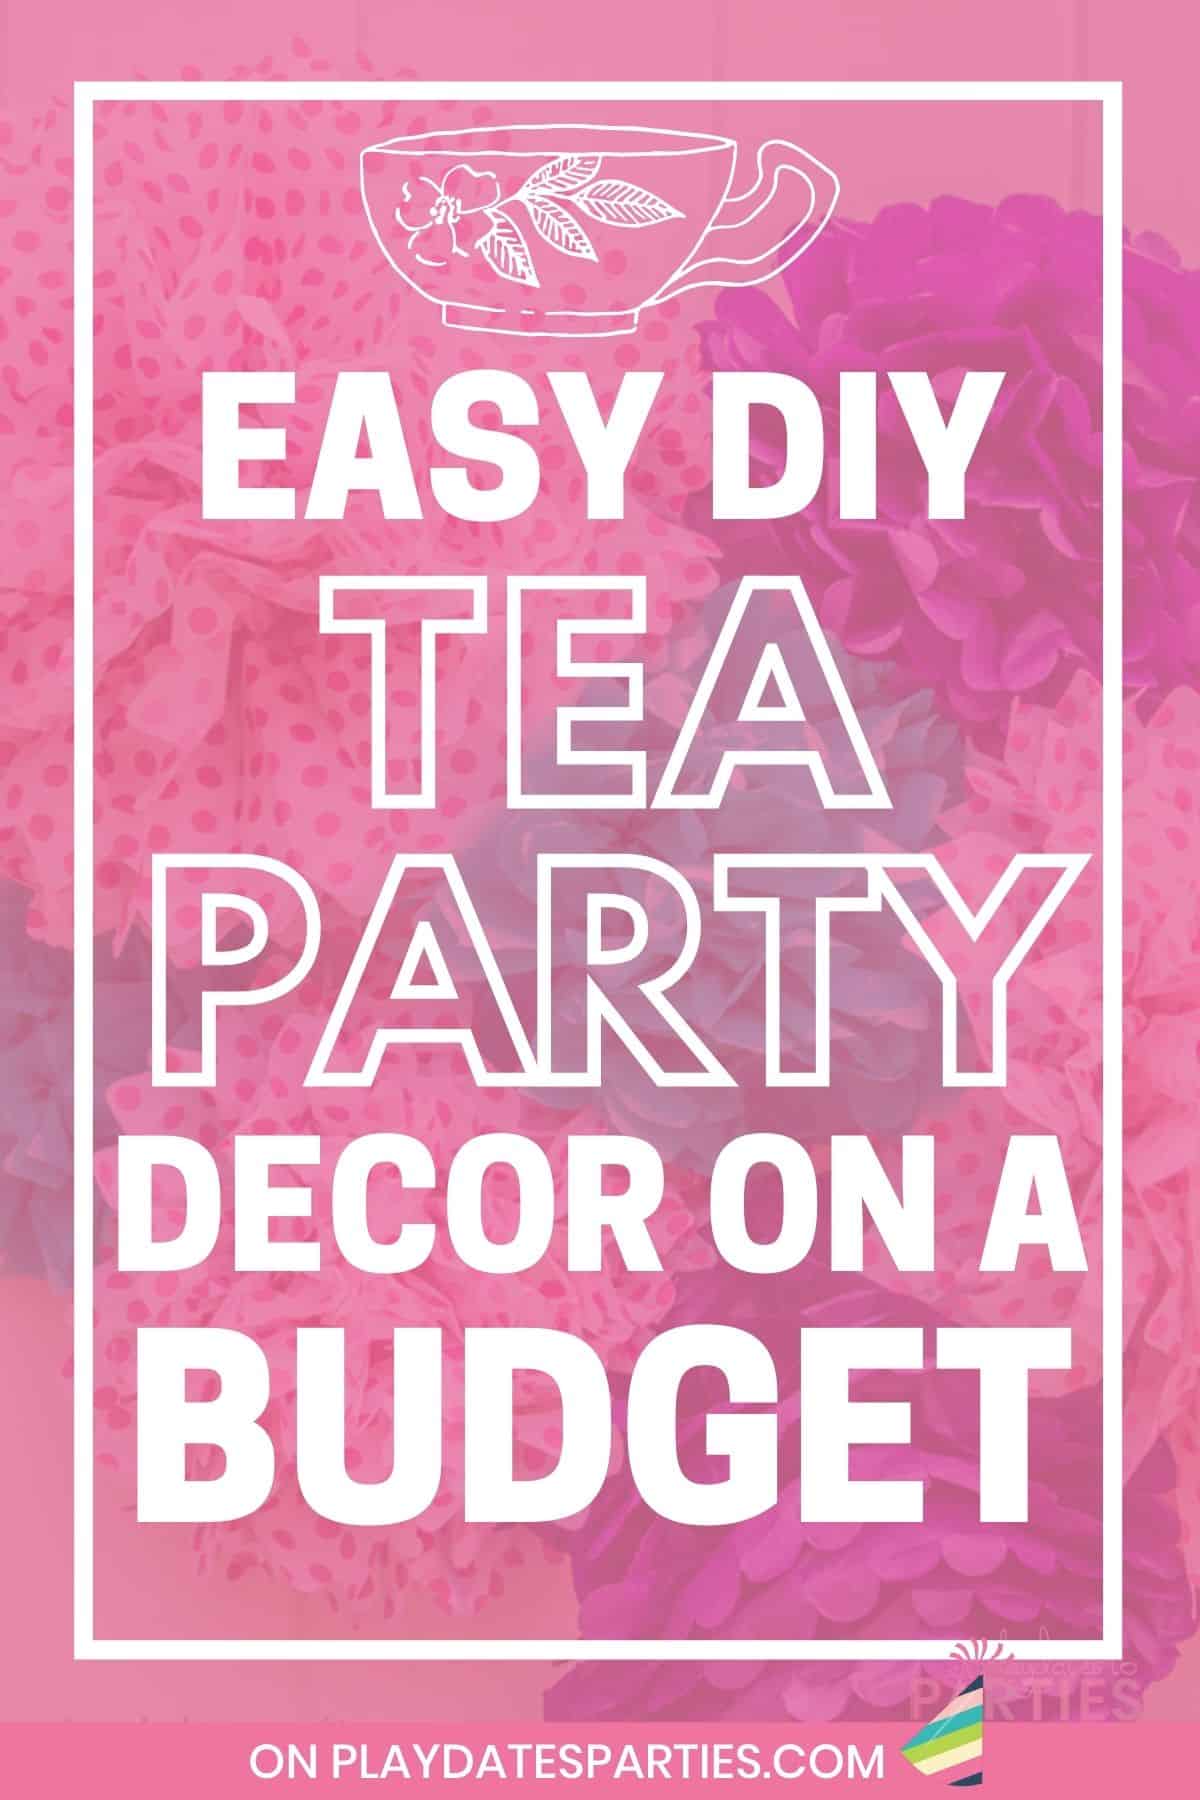 A pink graphic that says easy DIY tea party decorations on a budget.